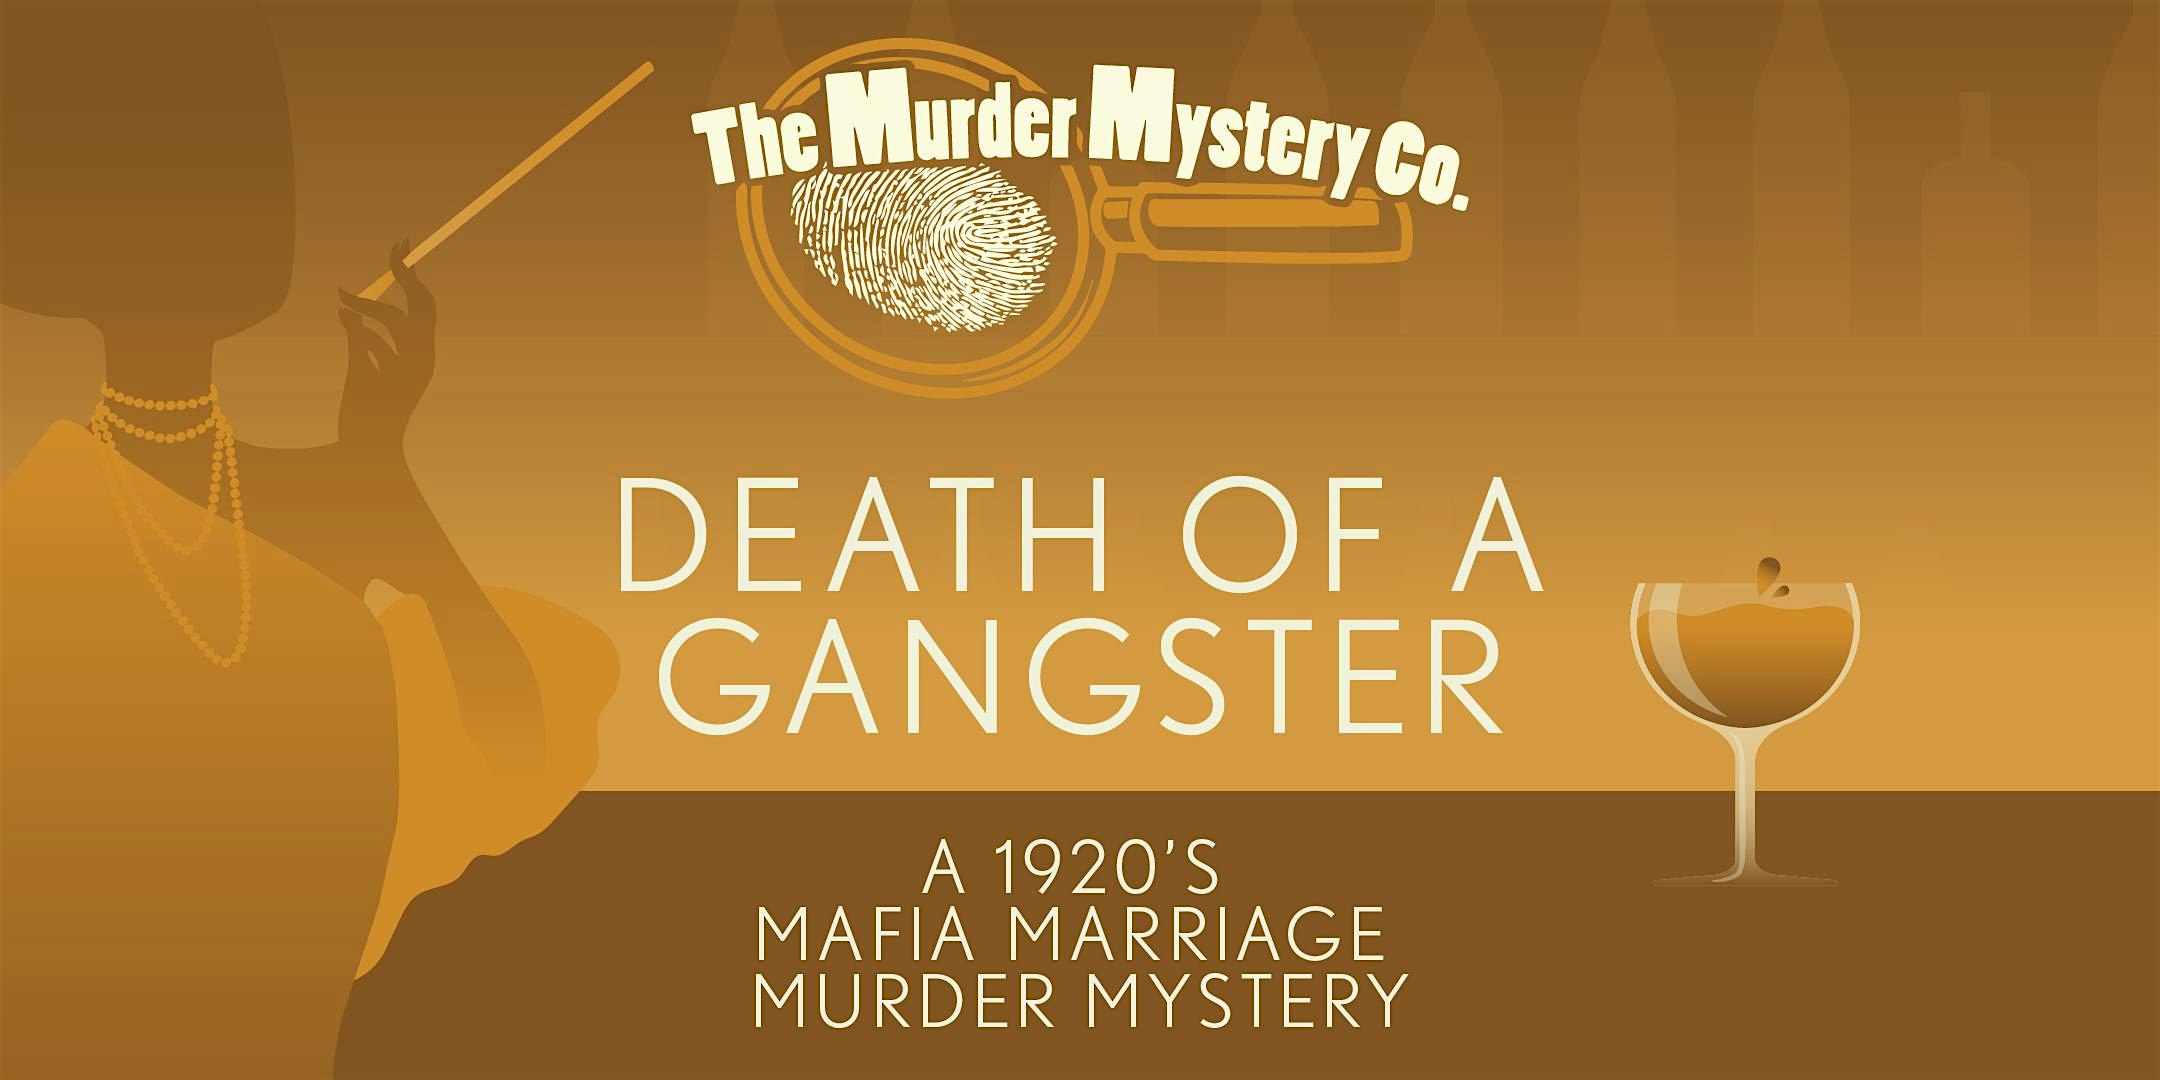 Murder Mystery Dinner Theater Show in Riverside: Death of a Gangster